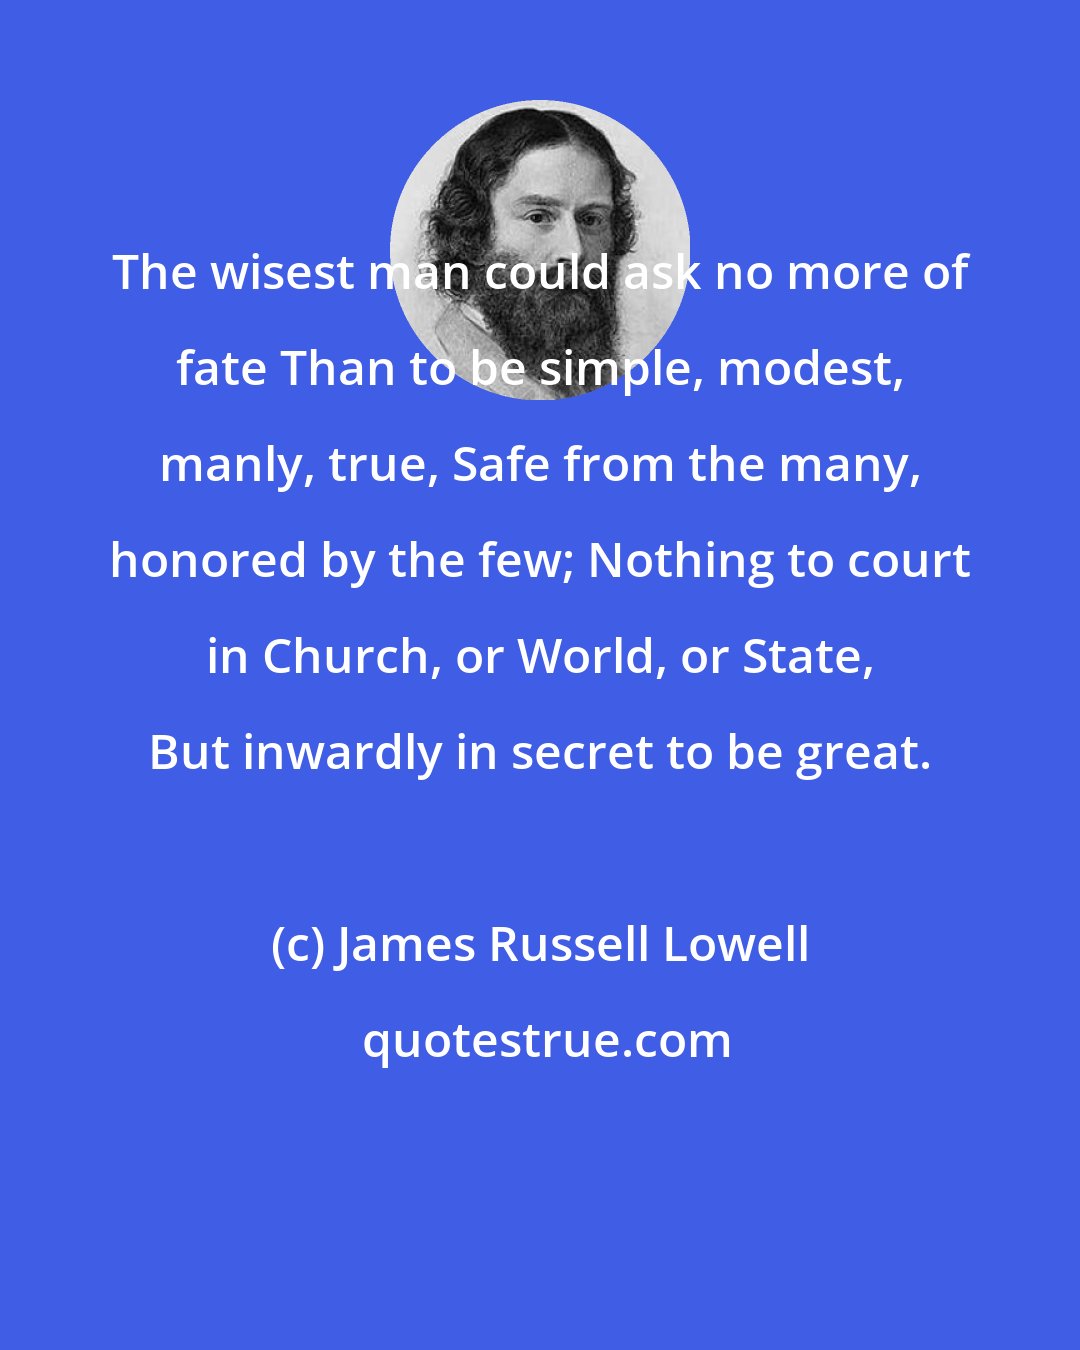 James Russell Lowell: The wisest man could ask no more of fate Than to be simple, modest, manly, true, Safe from the many, honored by the few; Nothing to court in Church, or World, or State, But inwardly in secret to be great.